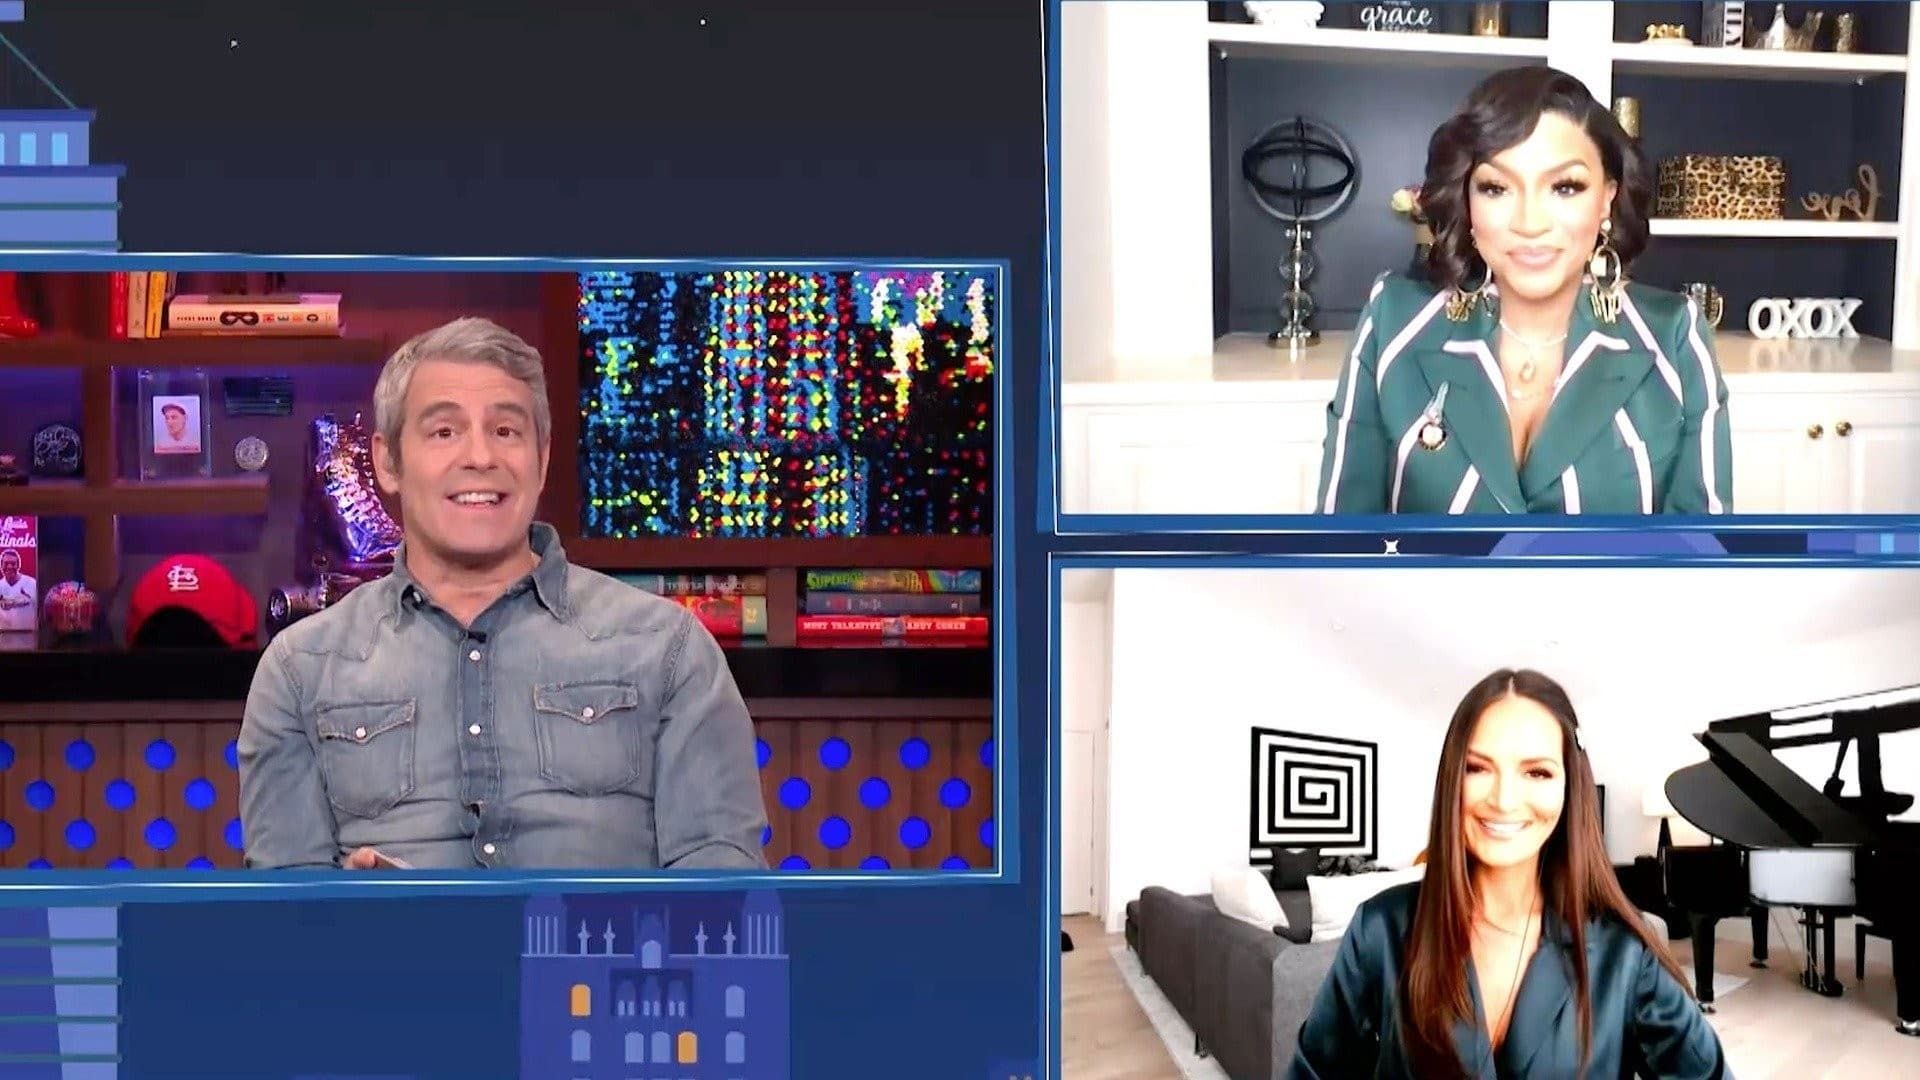 Watch What Happens Live with Andy Cohen background